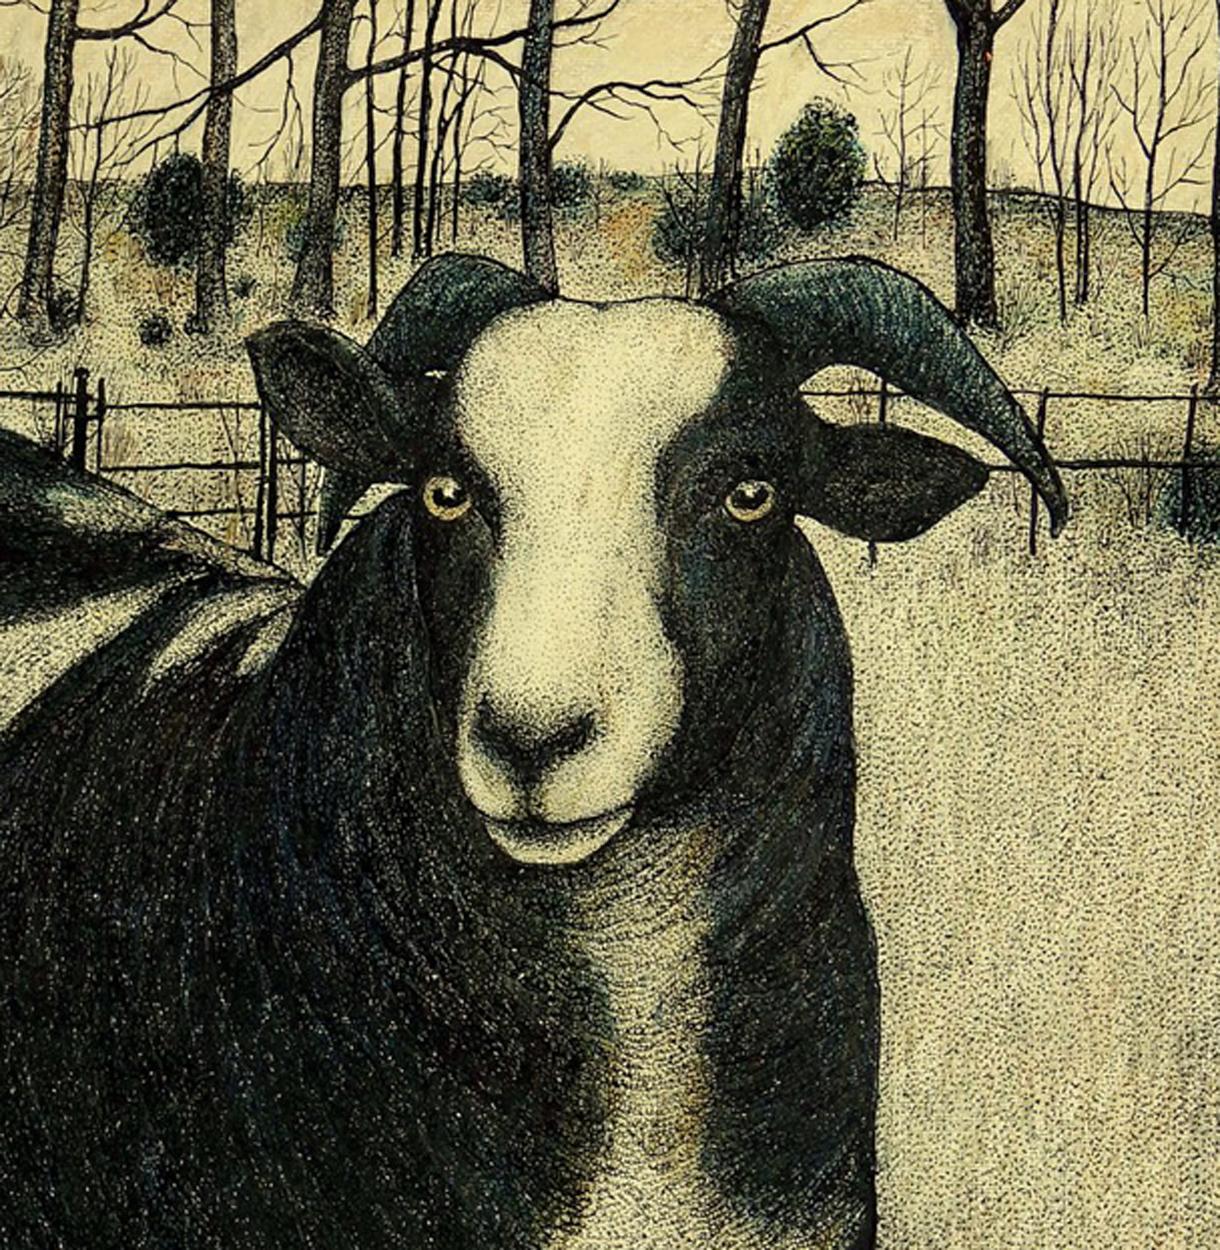 Jacob Sheep - New original work by Seren Bell. Mixed media on Fabriano paper, 17.5 inches x 20 inches.

Sold unframed. Can be framed for local buyers.

Seren's work is widely collected in the UK and globally.

For more than seven hundred